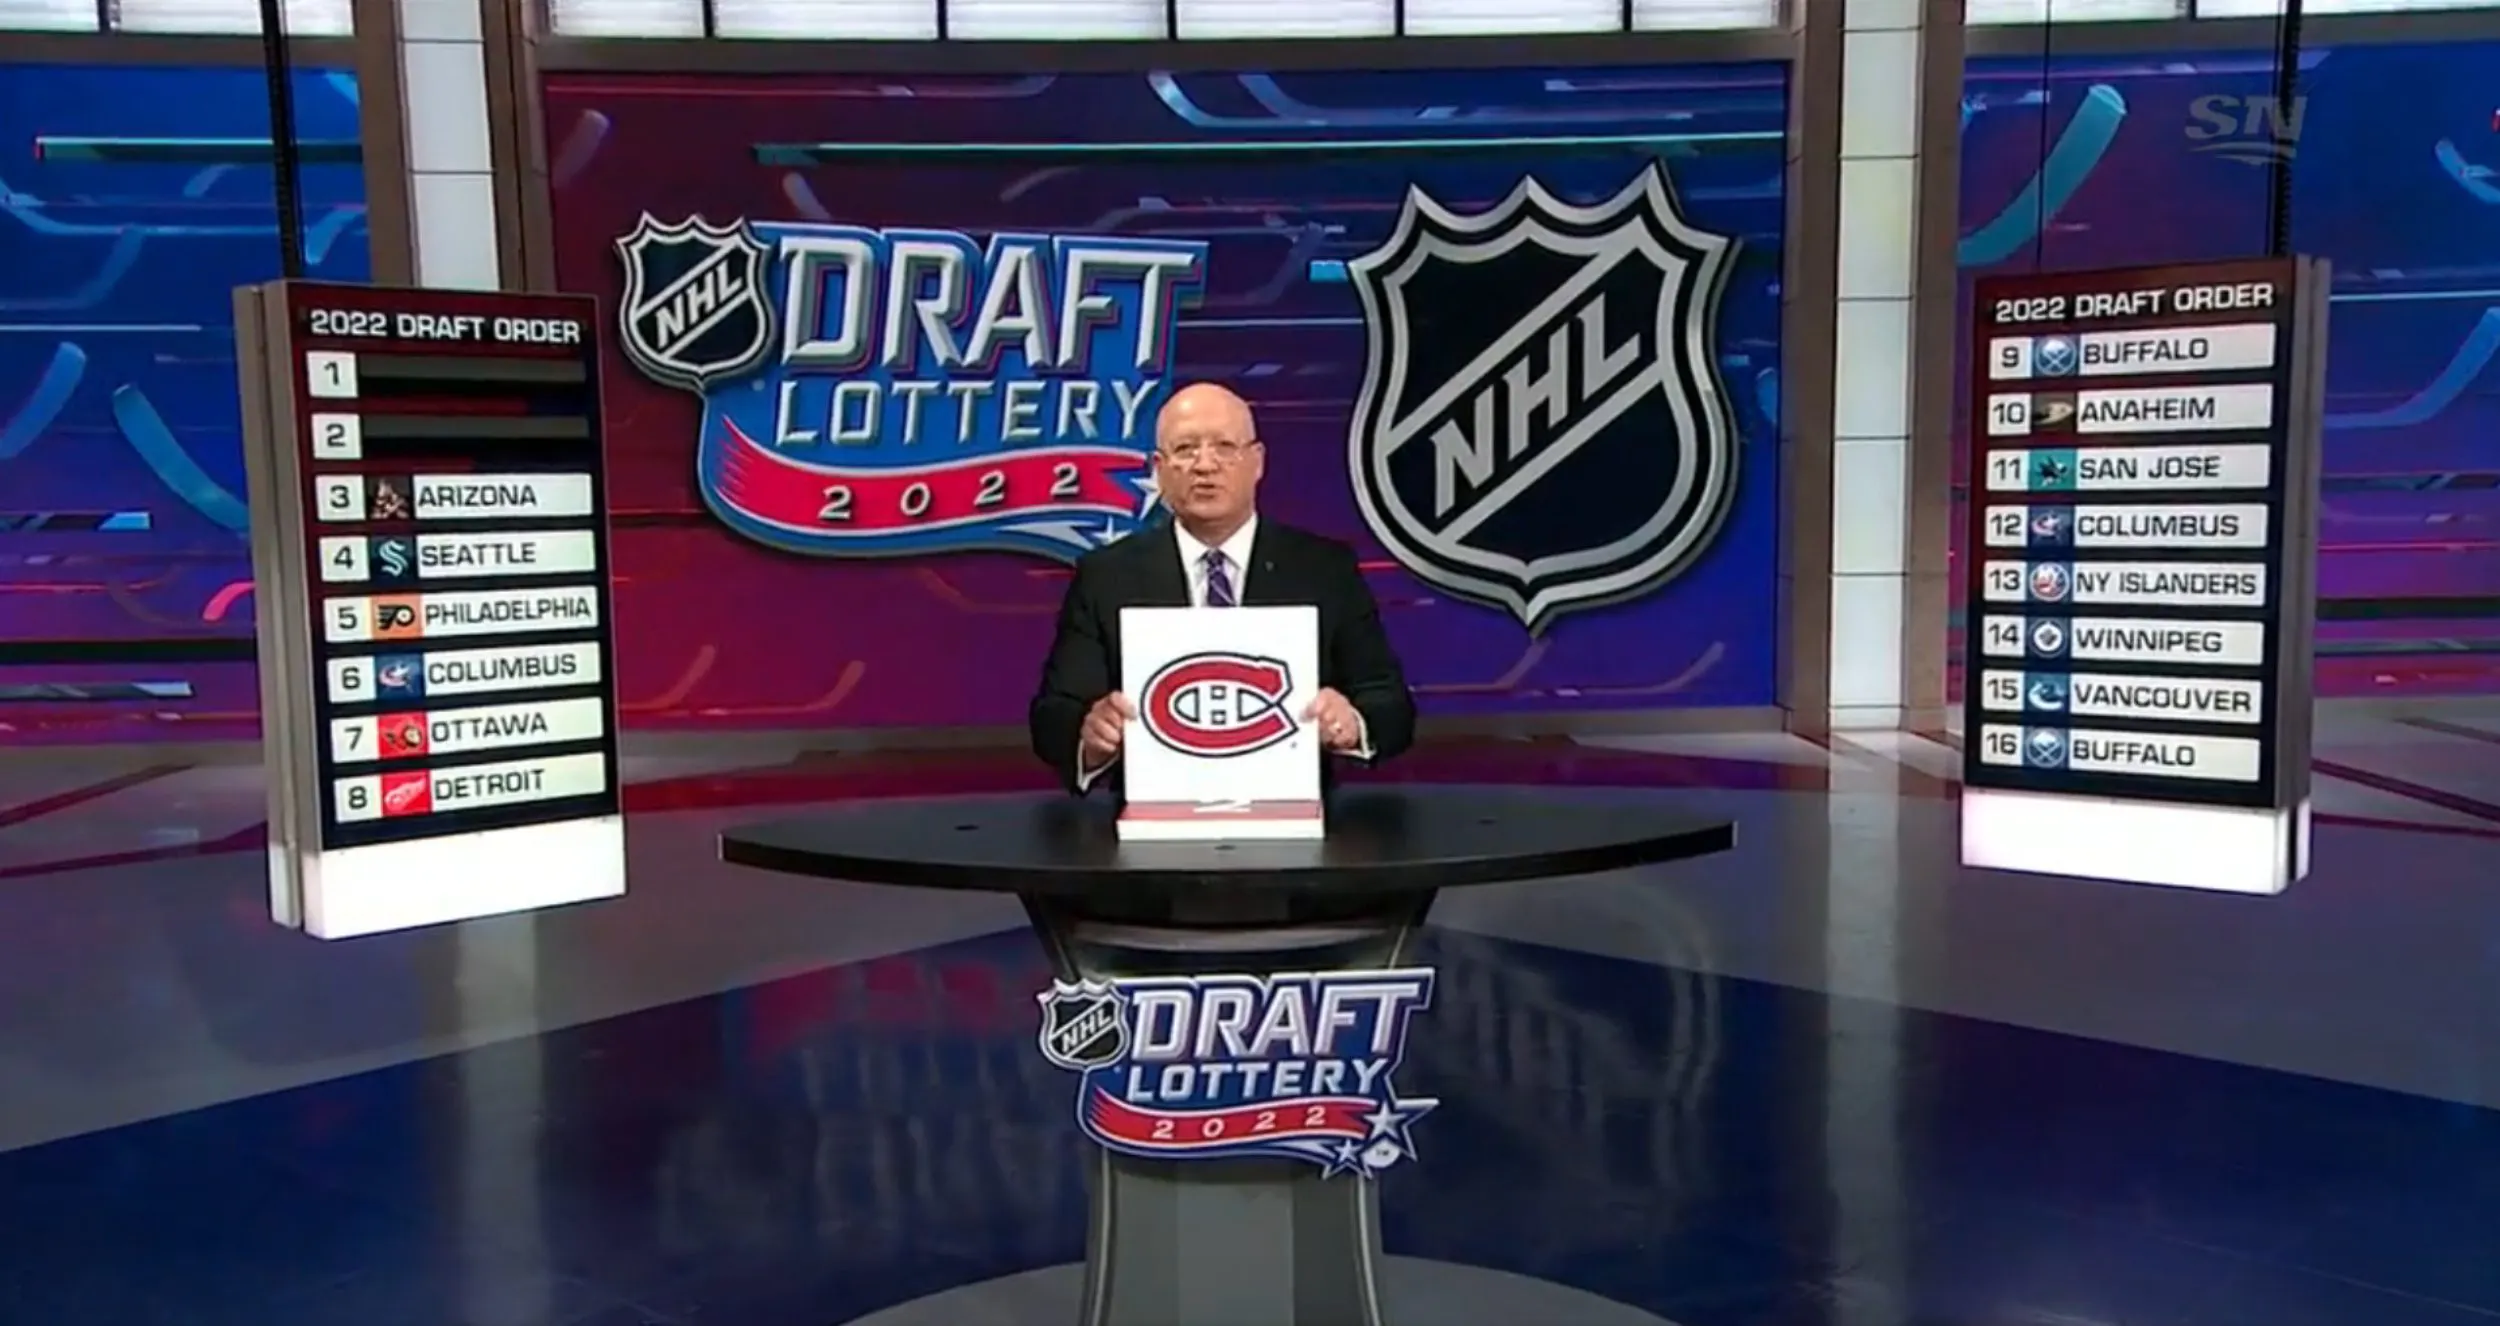 Montreal Canadiens to pick first in 2022 NHL entry draft, New Jersey Devils second